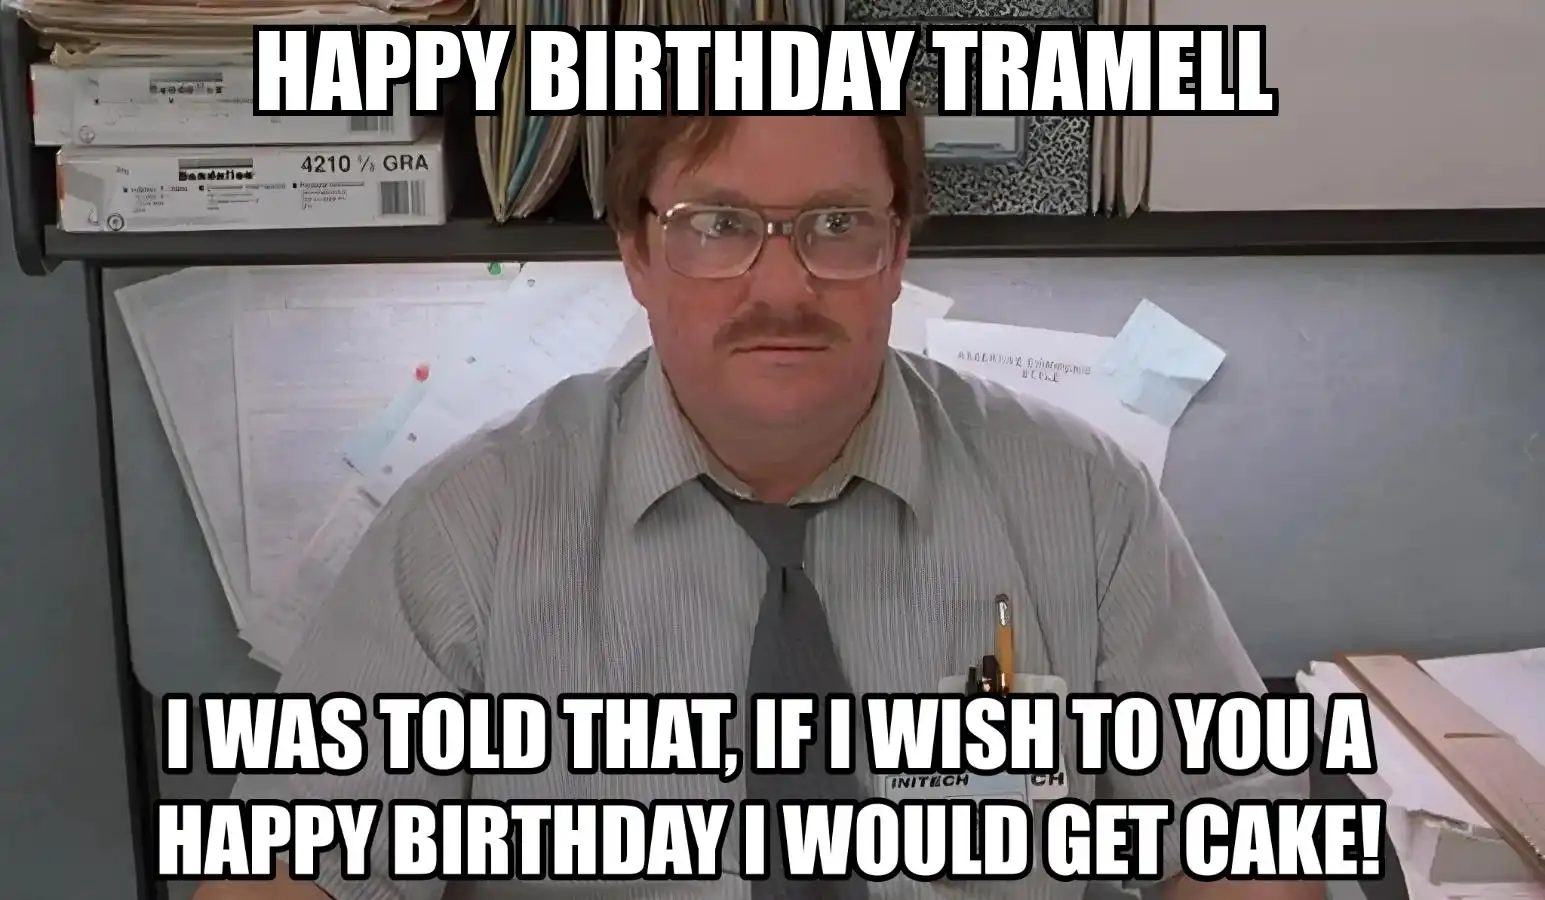 Happy Birthday Tramell I Would Get A Cake Meme